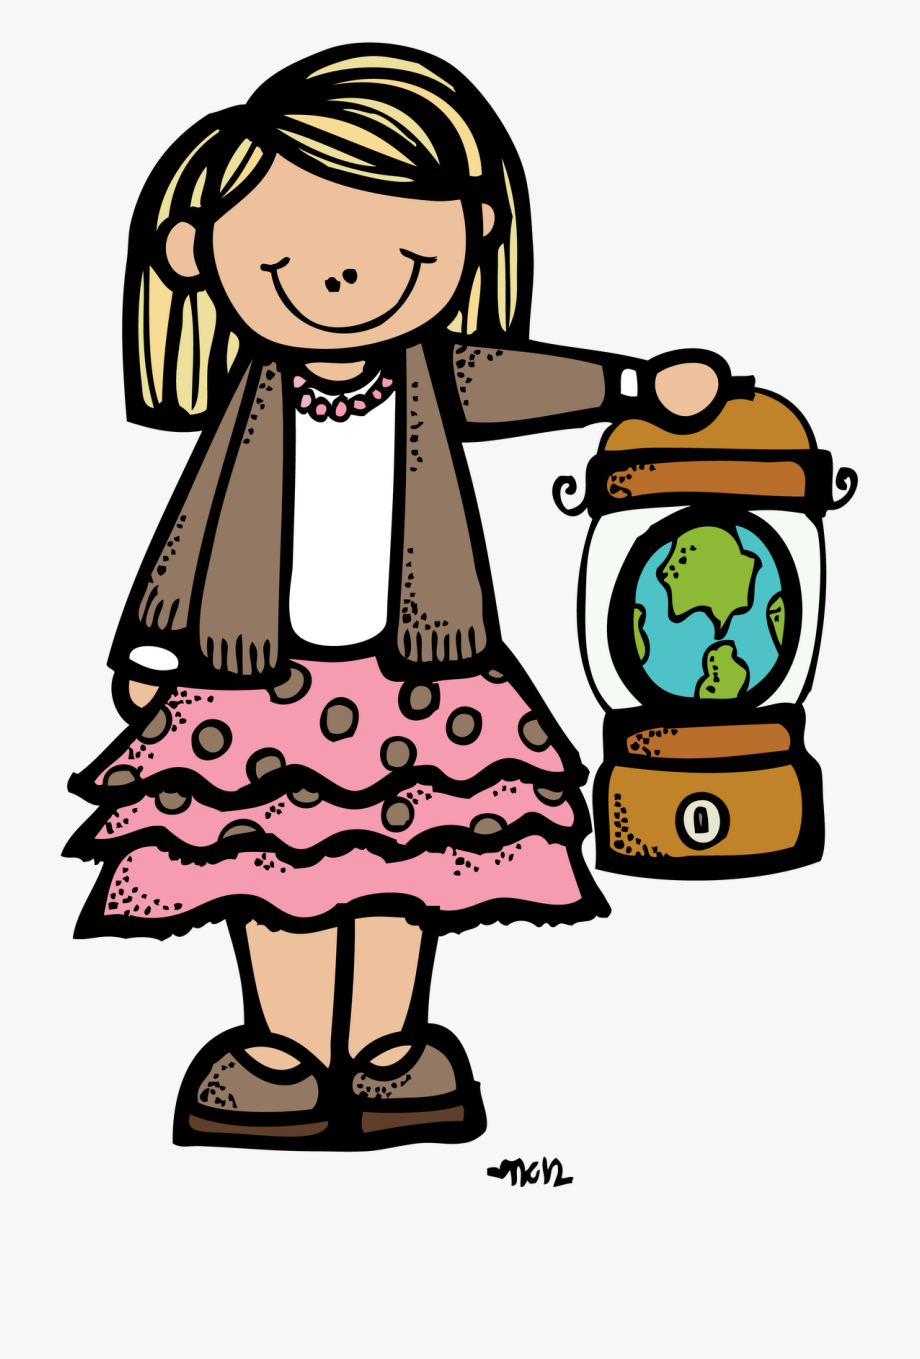 missionary clipart 2 sister